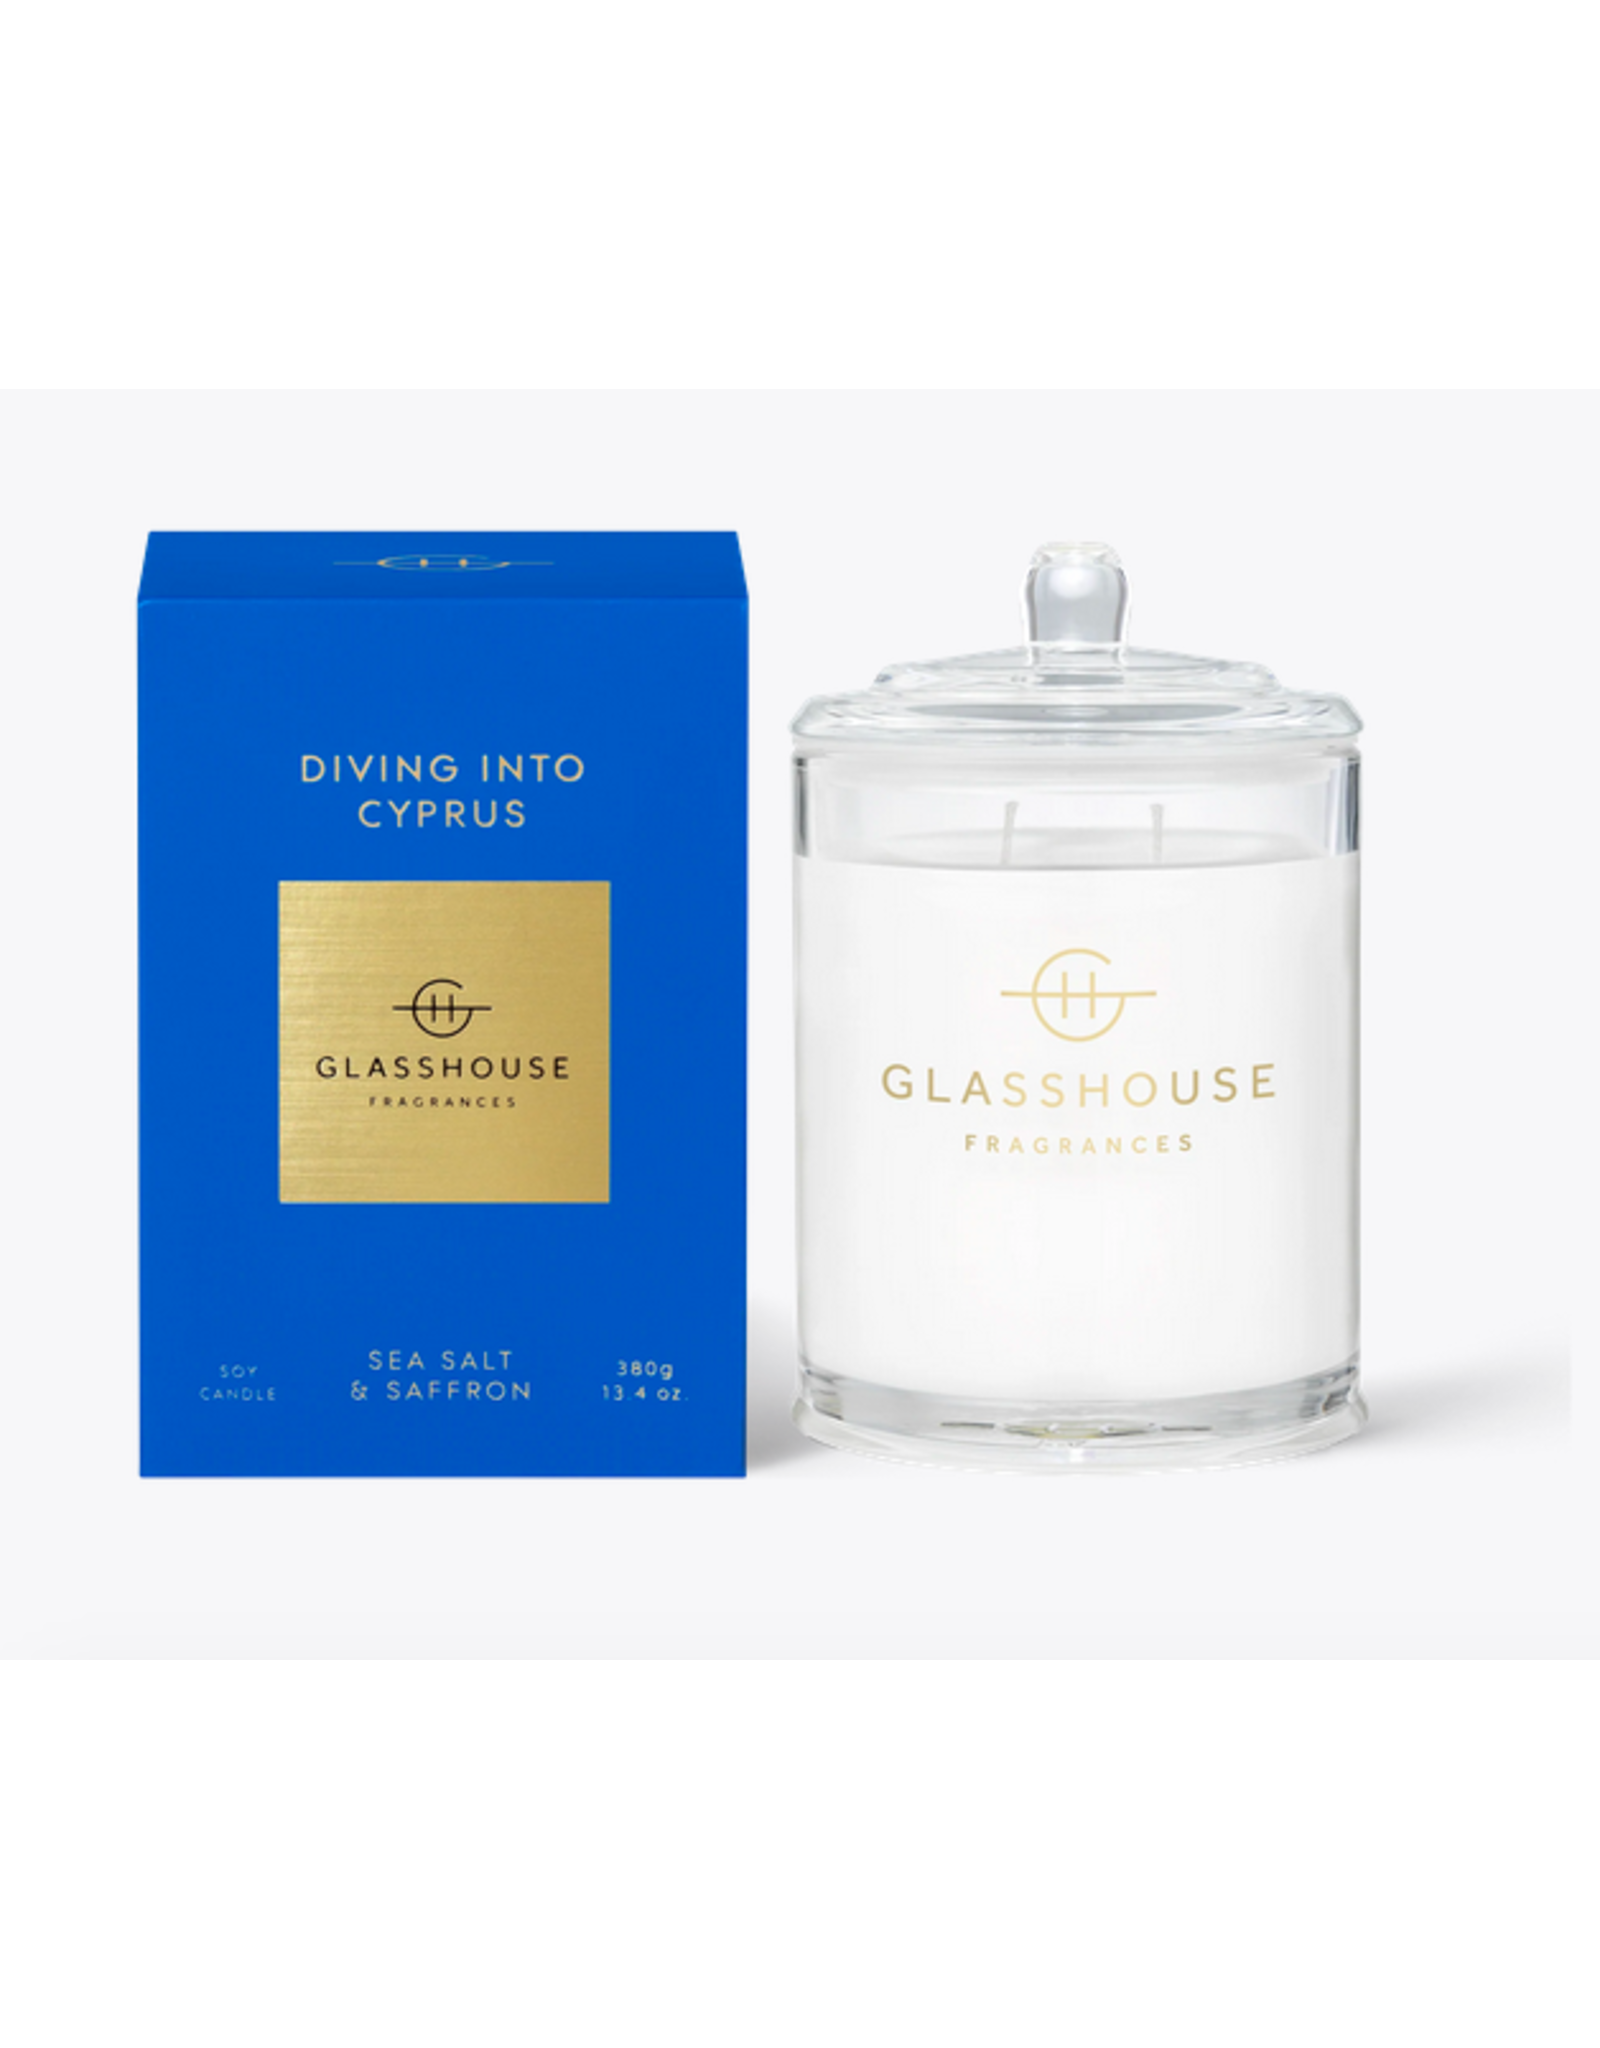 Glasshouse Fragrances Diving into Cyprus Boxed Candle